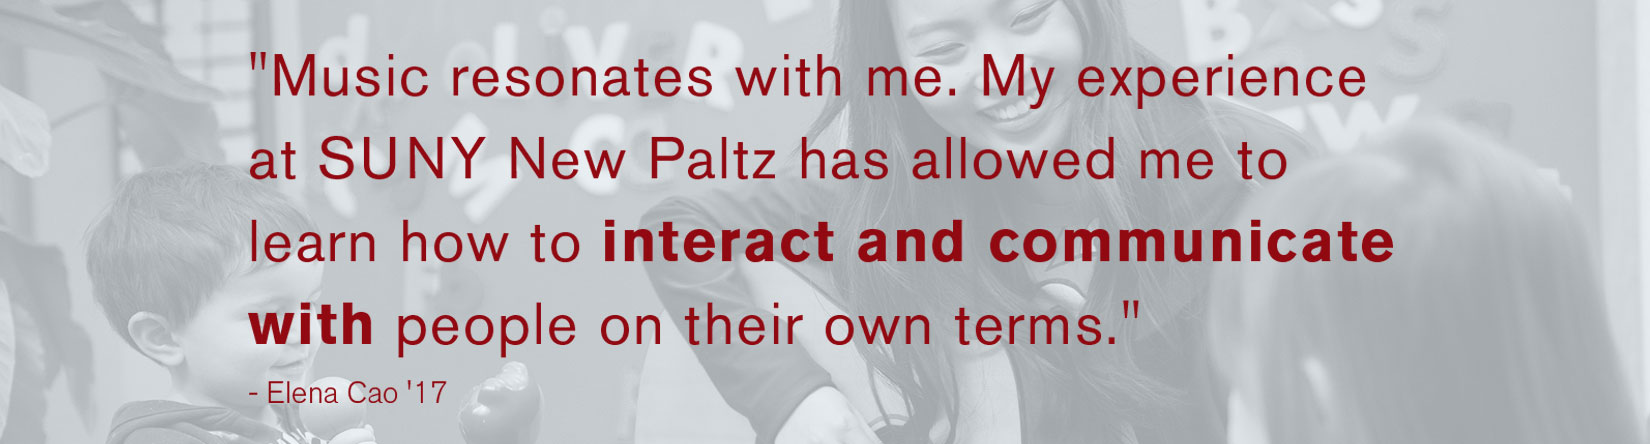 My experience at SUNY New Paltz has allowed me to learn how to interact and communicate with people on their own terms.